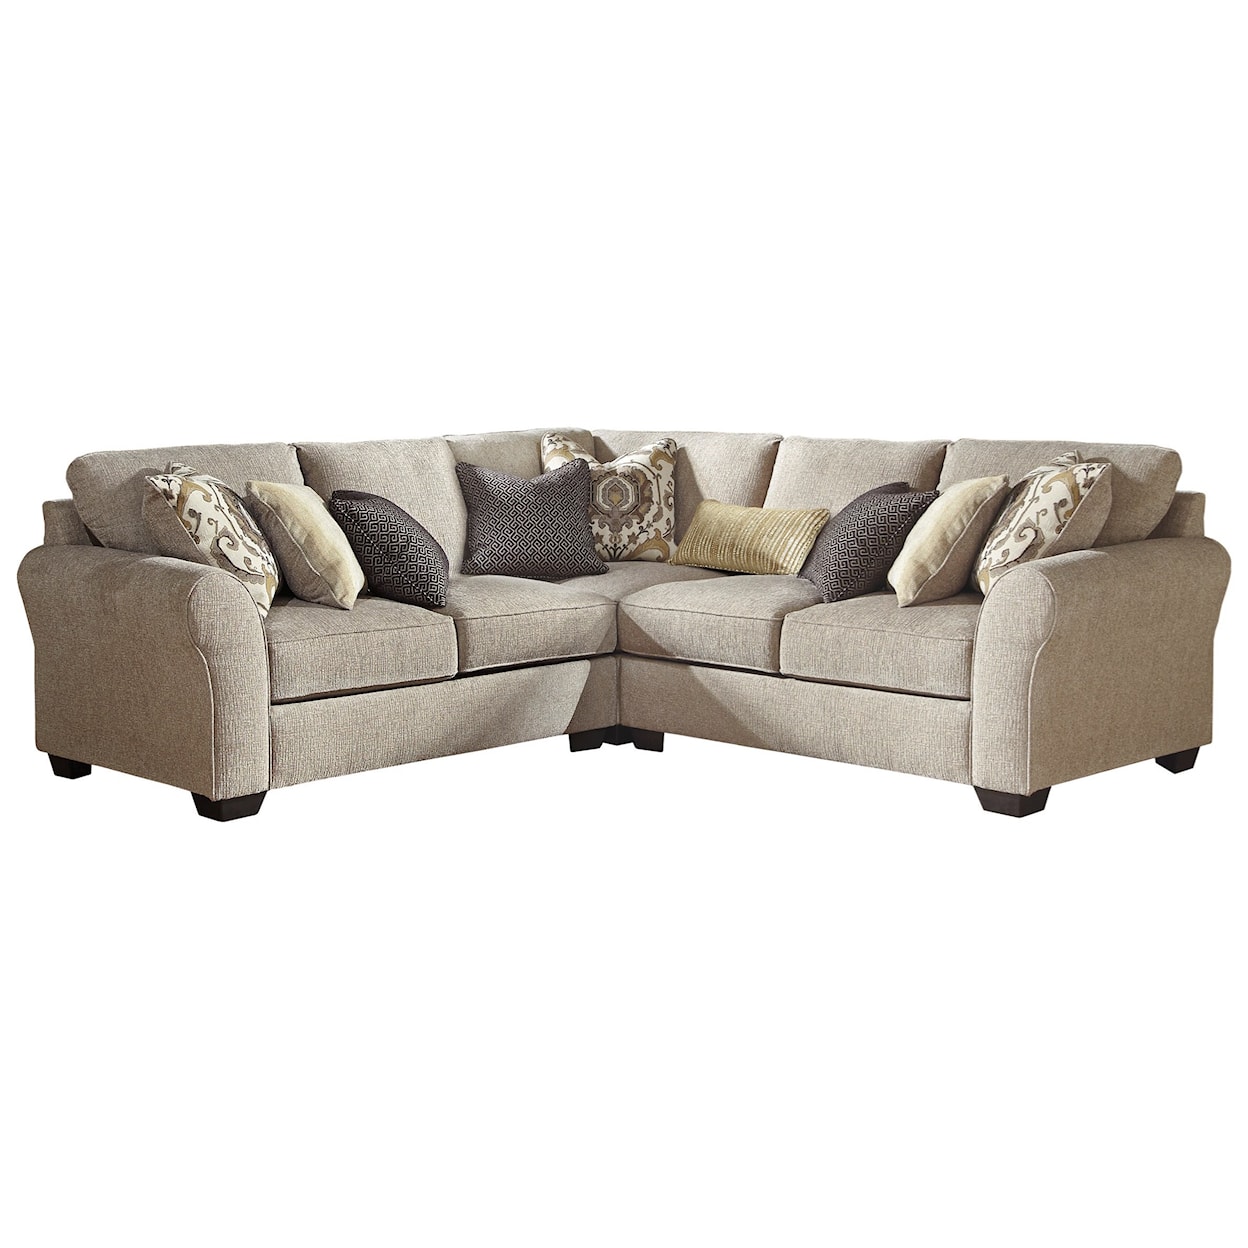 Benchcraft Pantomine 3-Piece Sectional